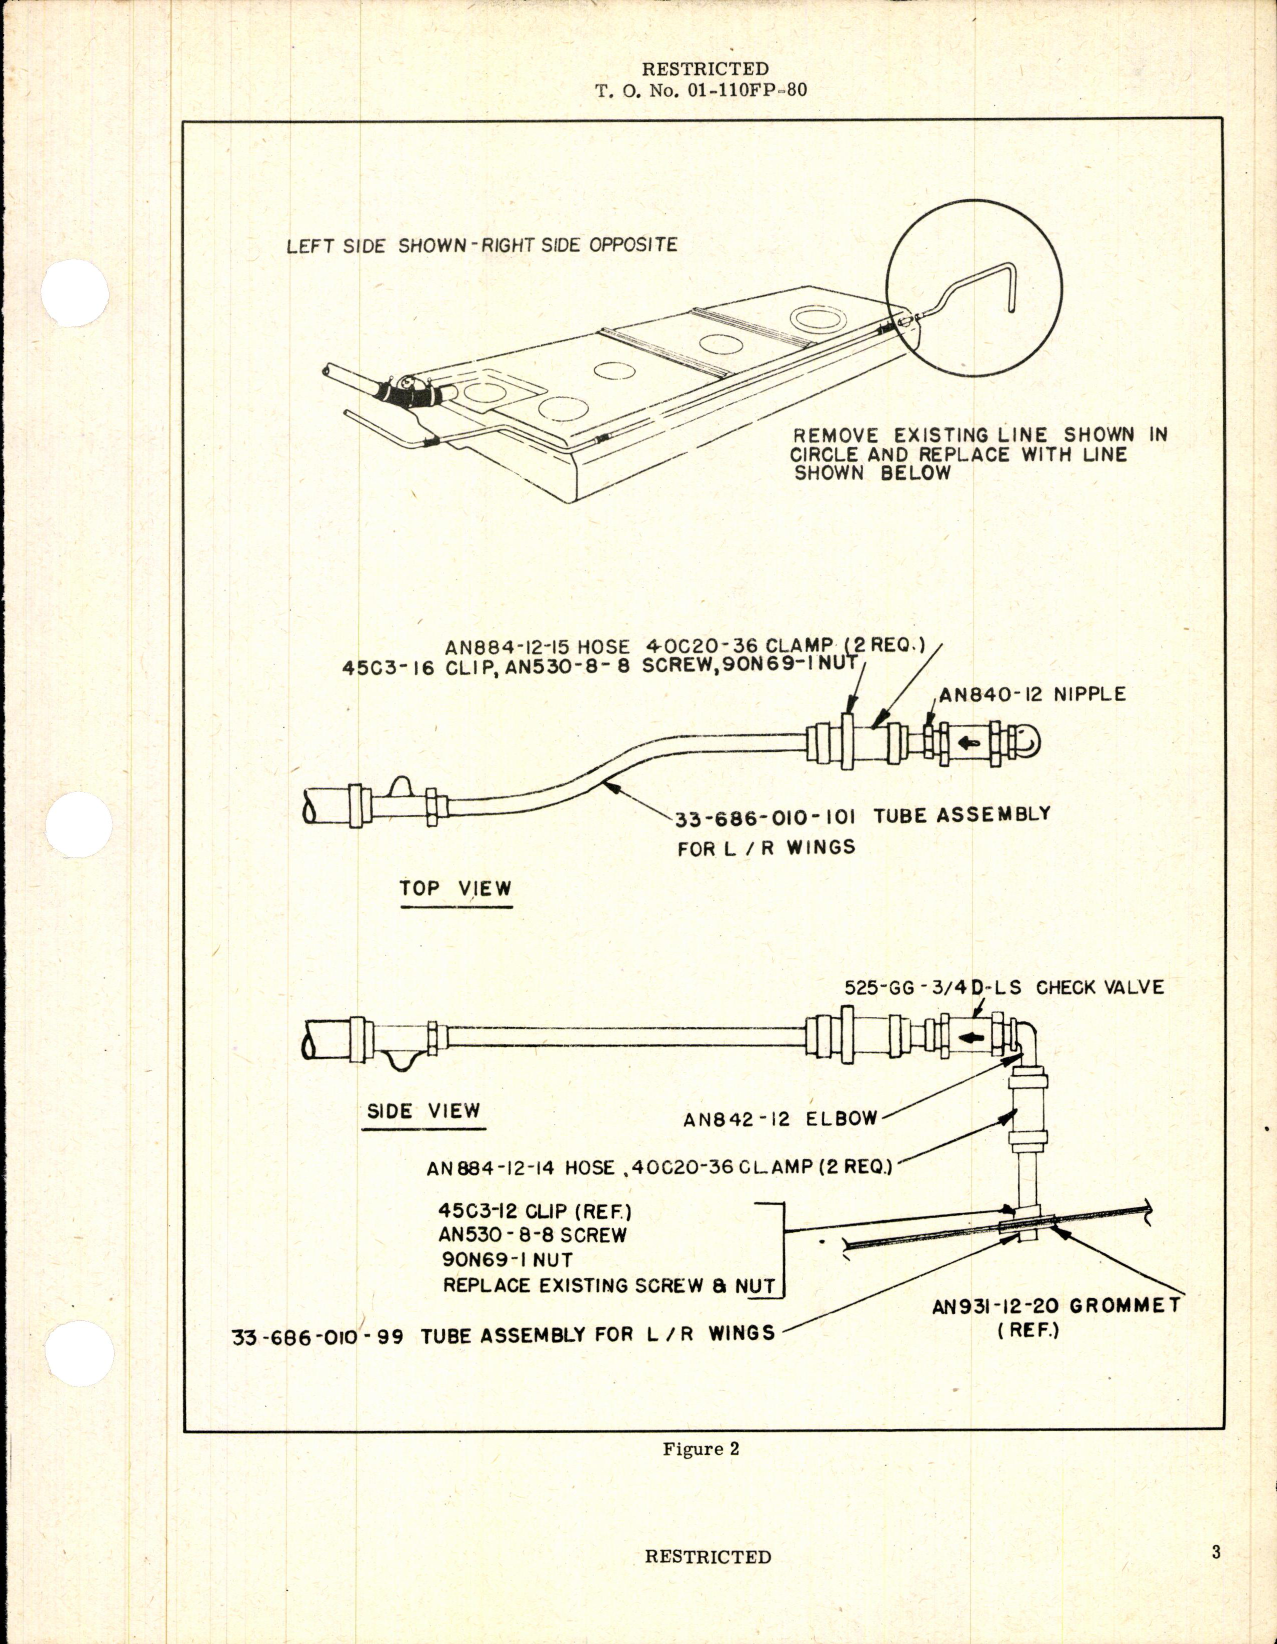 Sample page 3 from AirCorps Library document: Modification of Fuel System for P-63